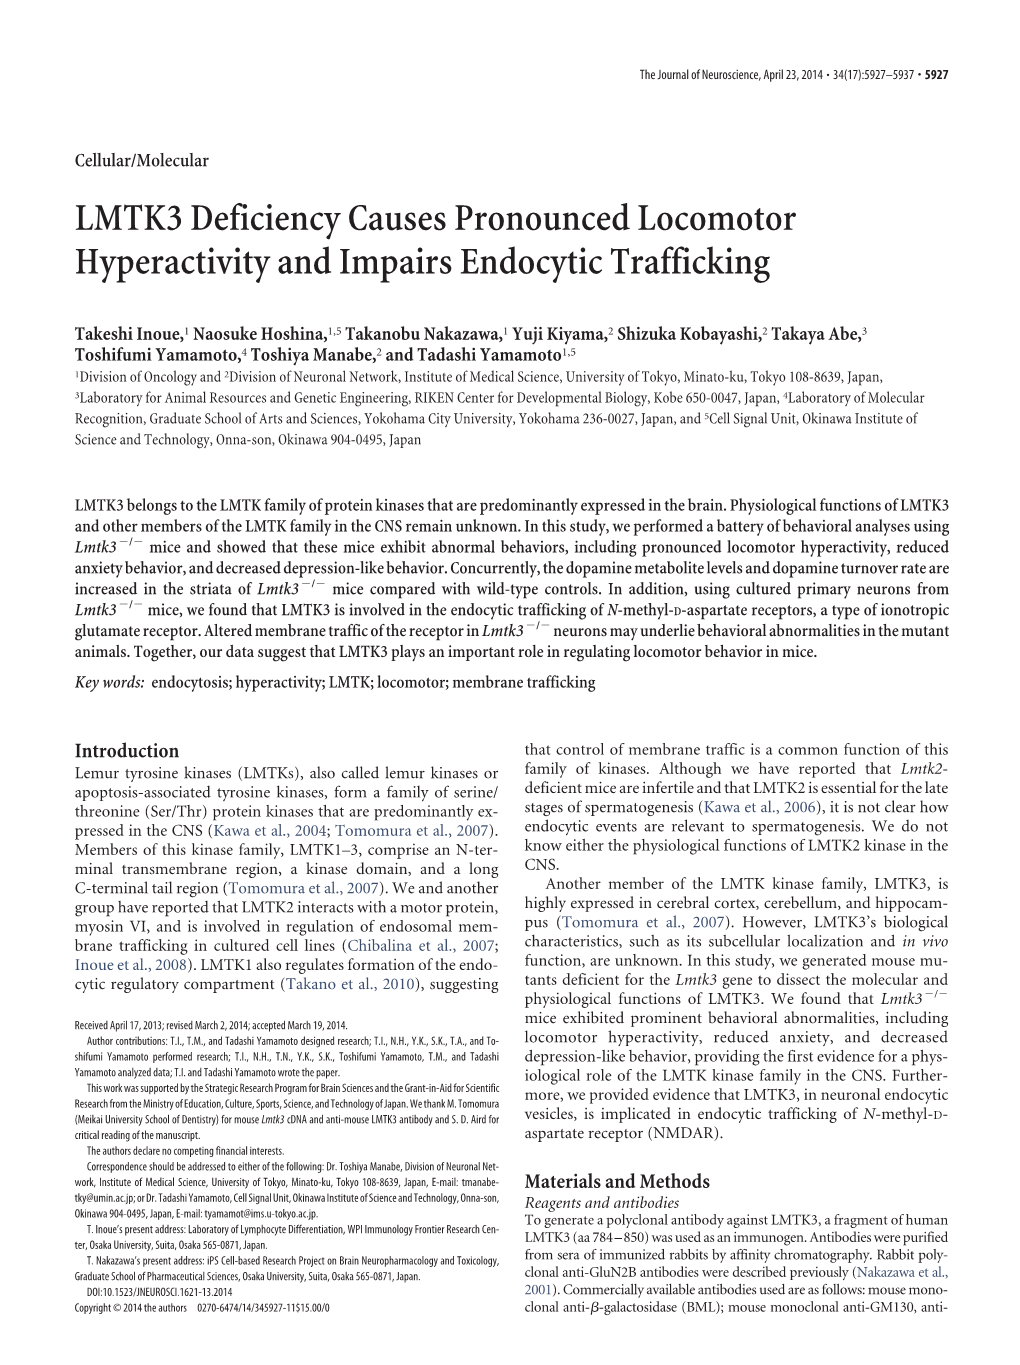 LMTK3 Deficiency Causes Pronounced Locomotor Hyperactivity and Impairs Endocytic Trafficking